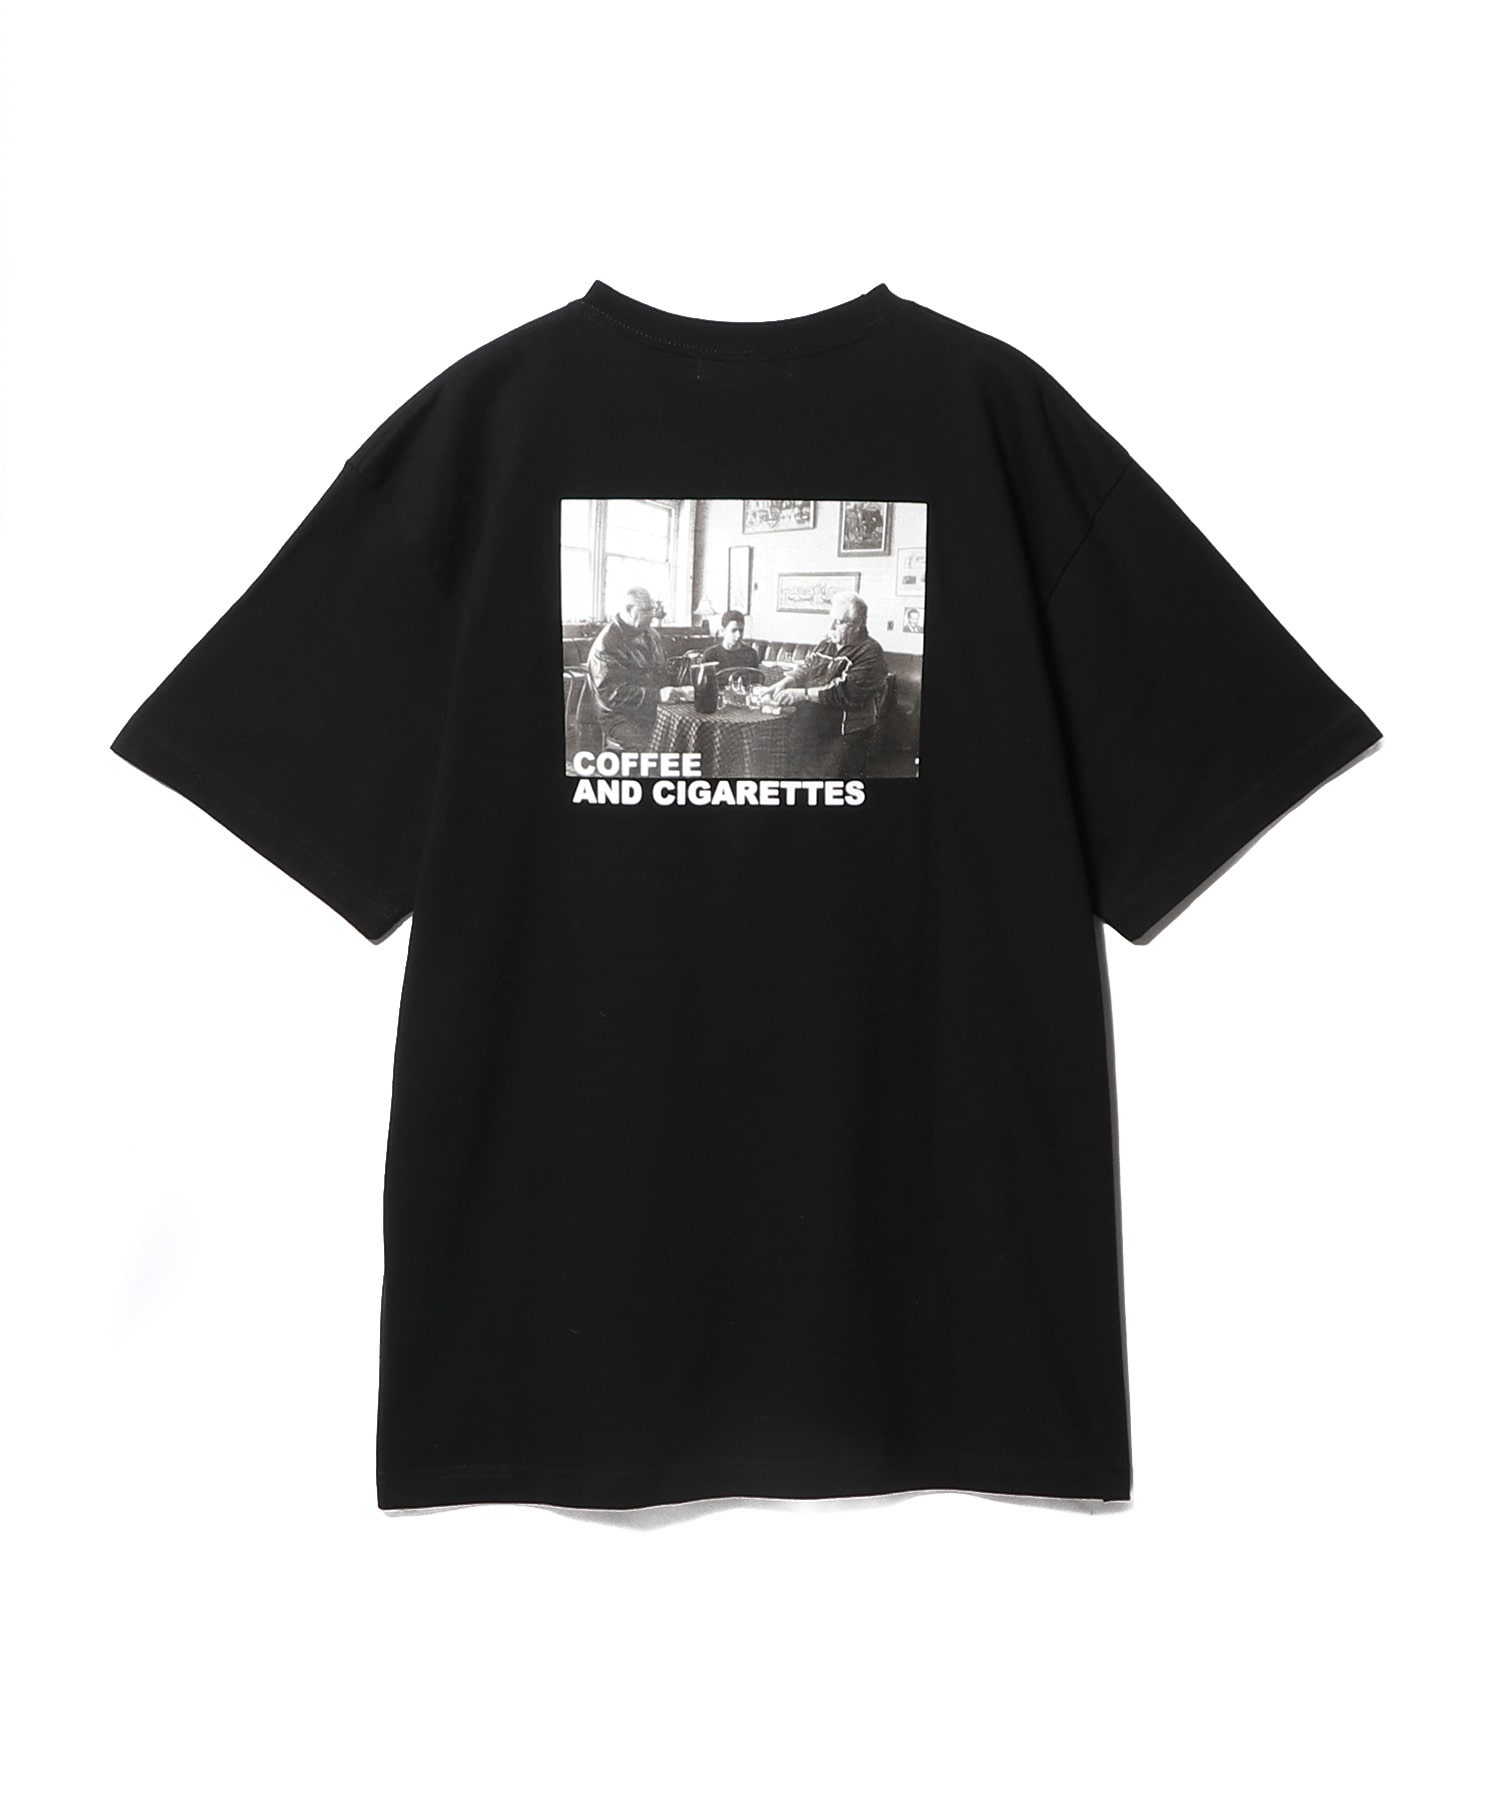 ”Coffee and Cigarettes” Men'sバックプリントカットソー＜Jim Jarmusch＞ 詳細画像 ブラック 1